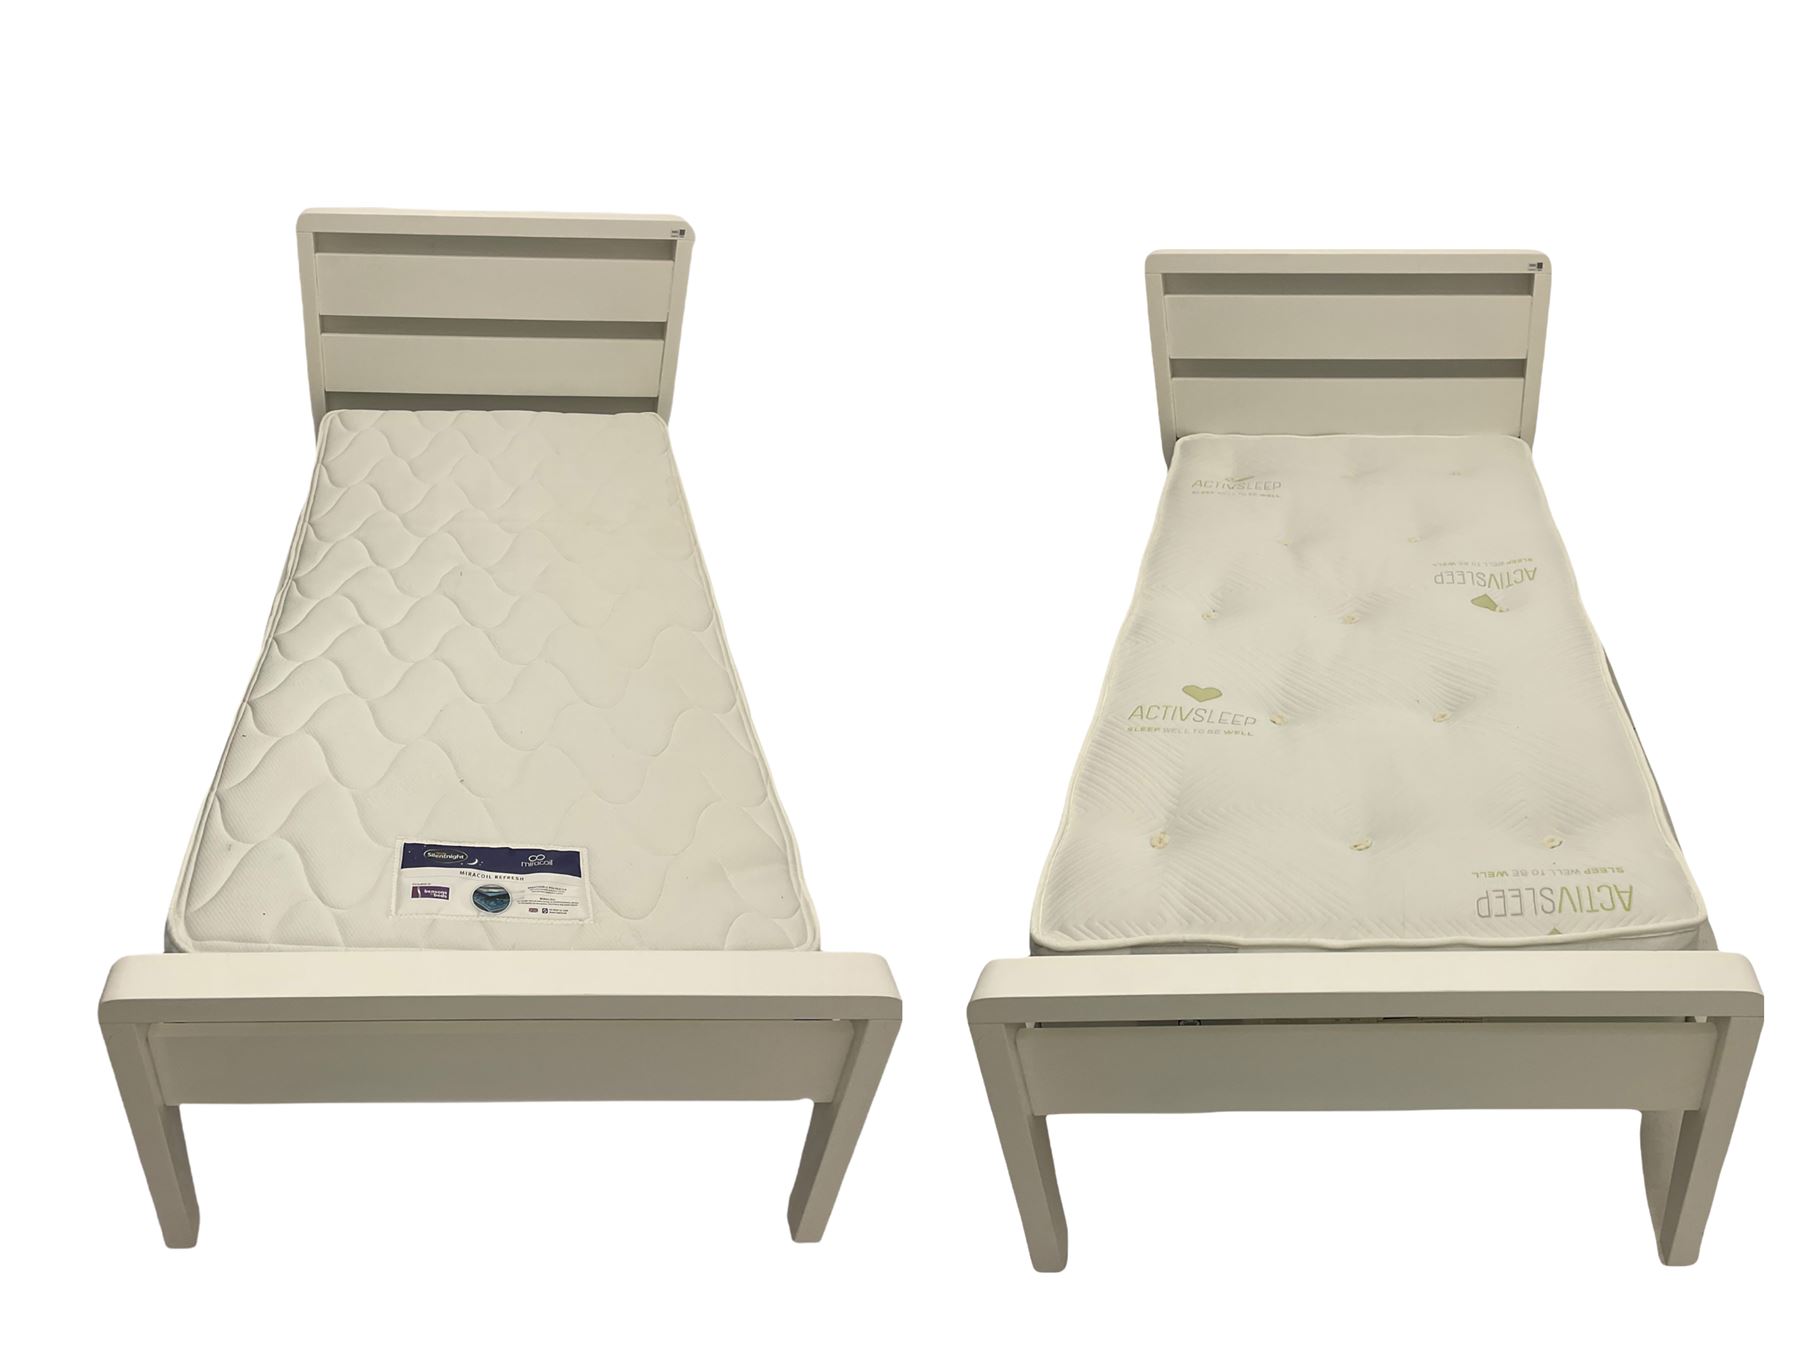 Pair "Hip-Hop" white finish single 3' bedframes with mattresses